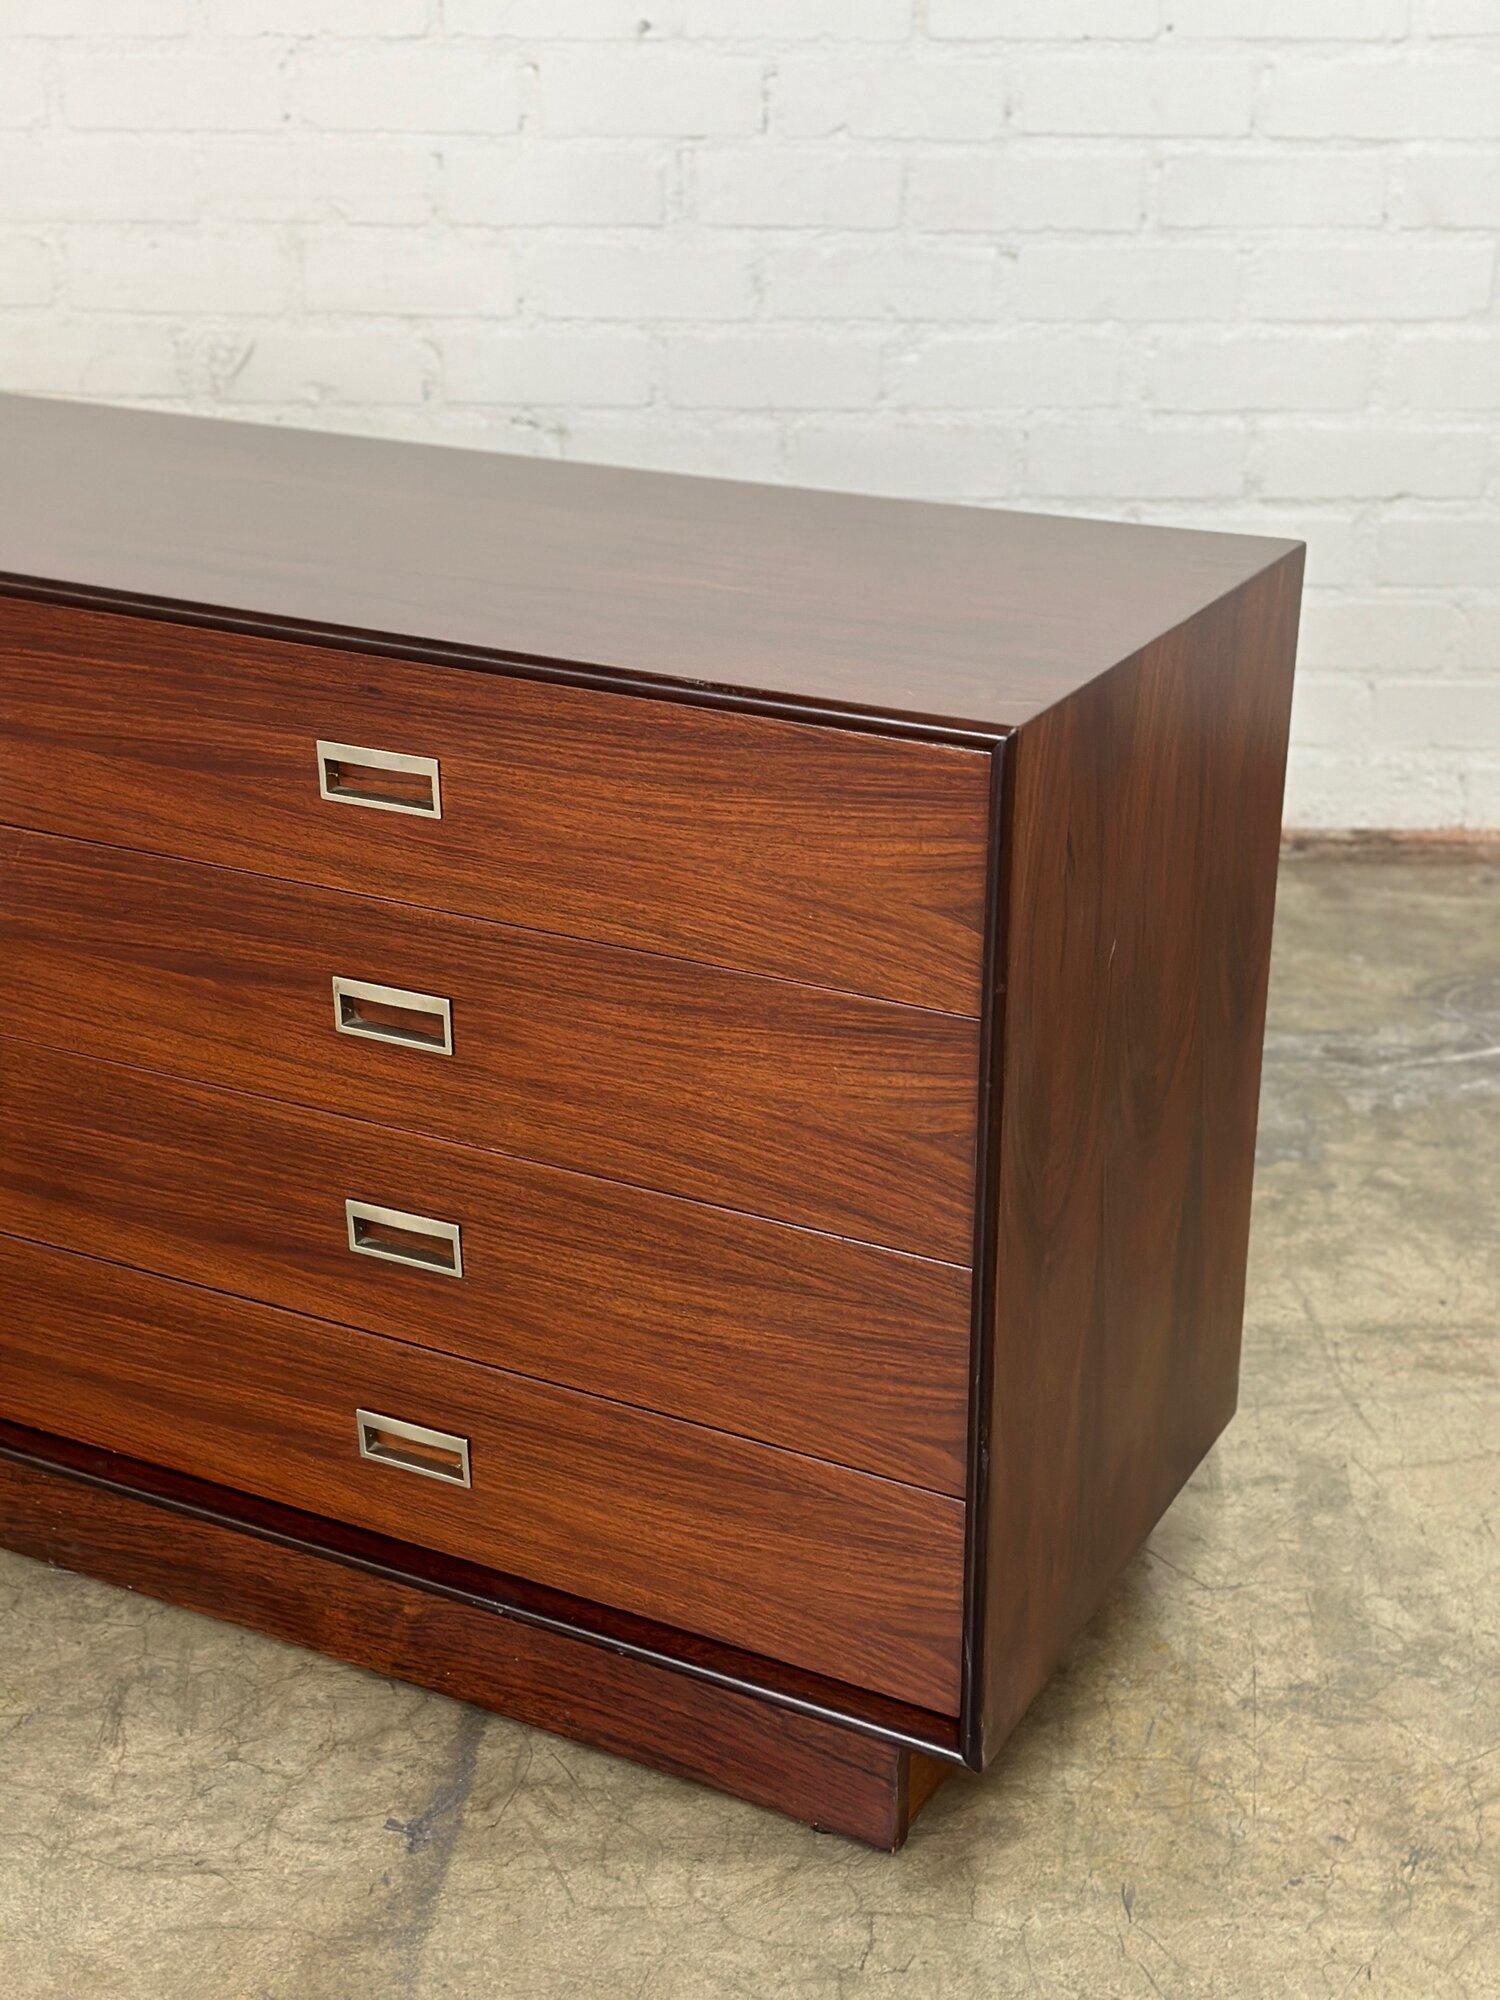 W64 D18.5 H29

Vintage rosewood dresser in fully restored conditon. Item is structurally sound and is fully functional. Dresser sits on a plinth base for great stability. Item has orginal recessed hardware and shows no major areas of wear. 

